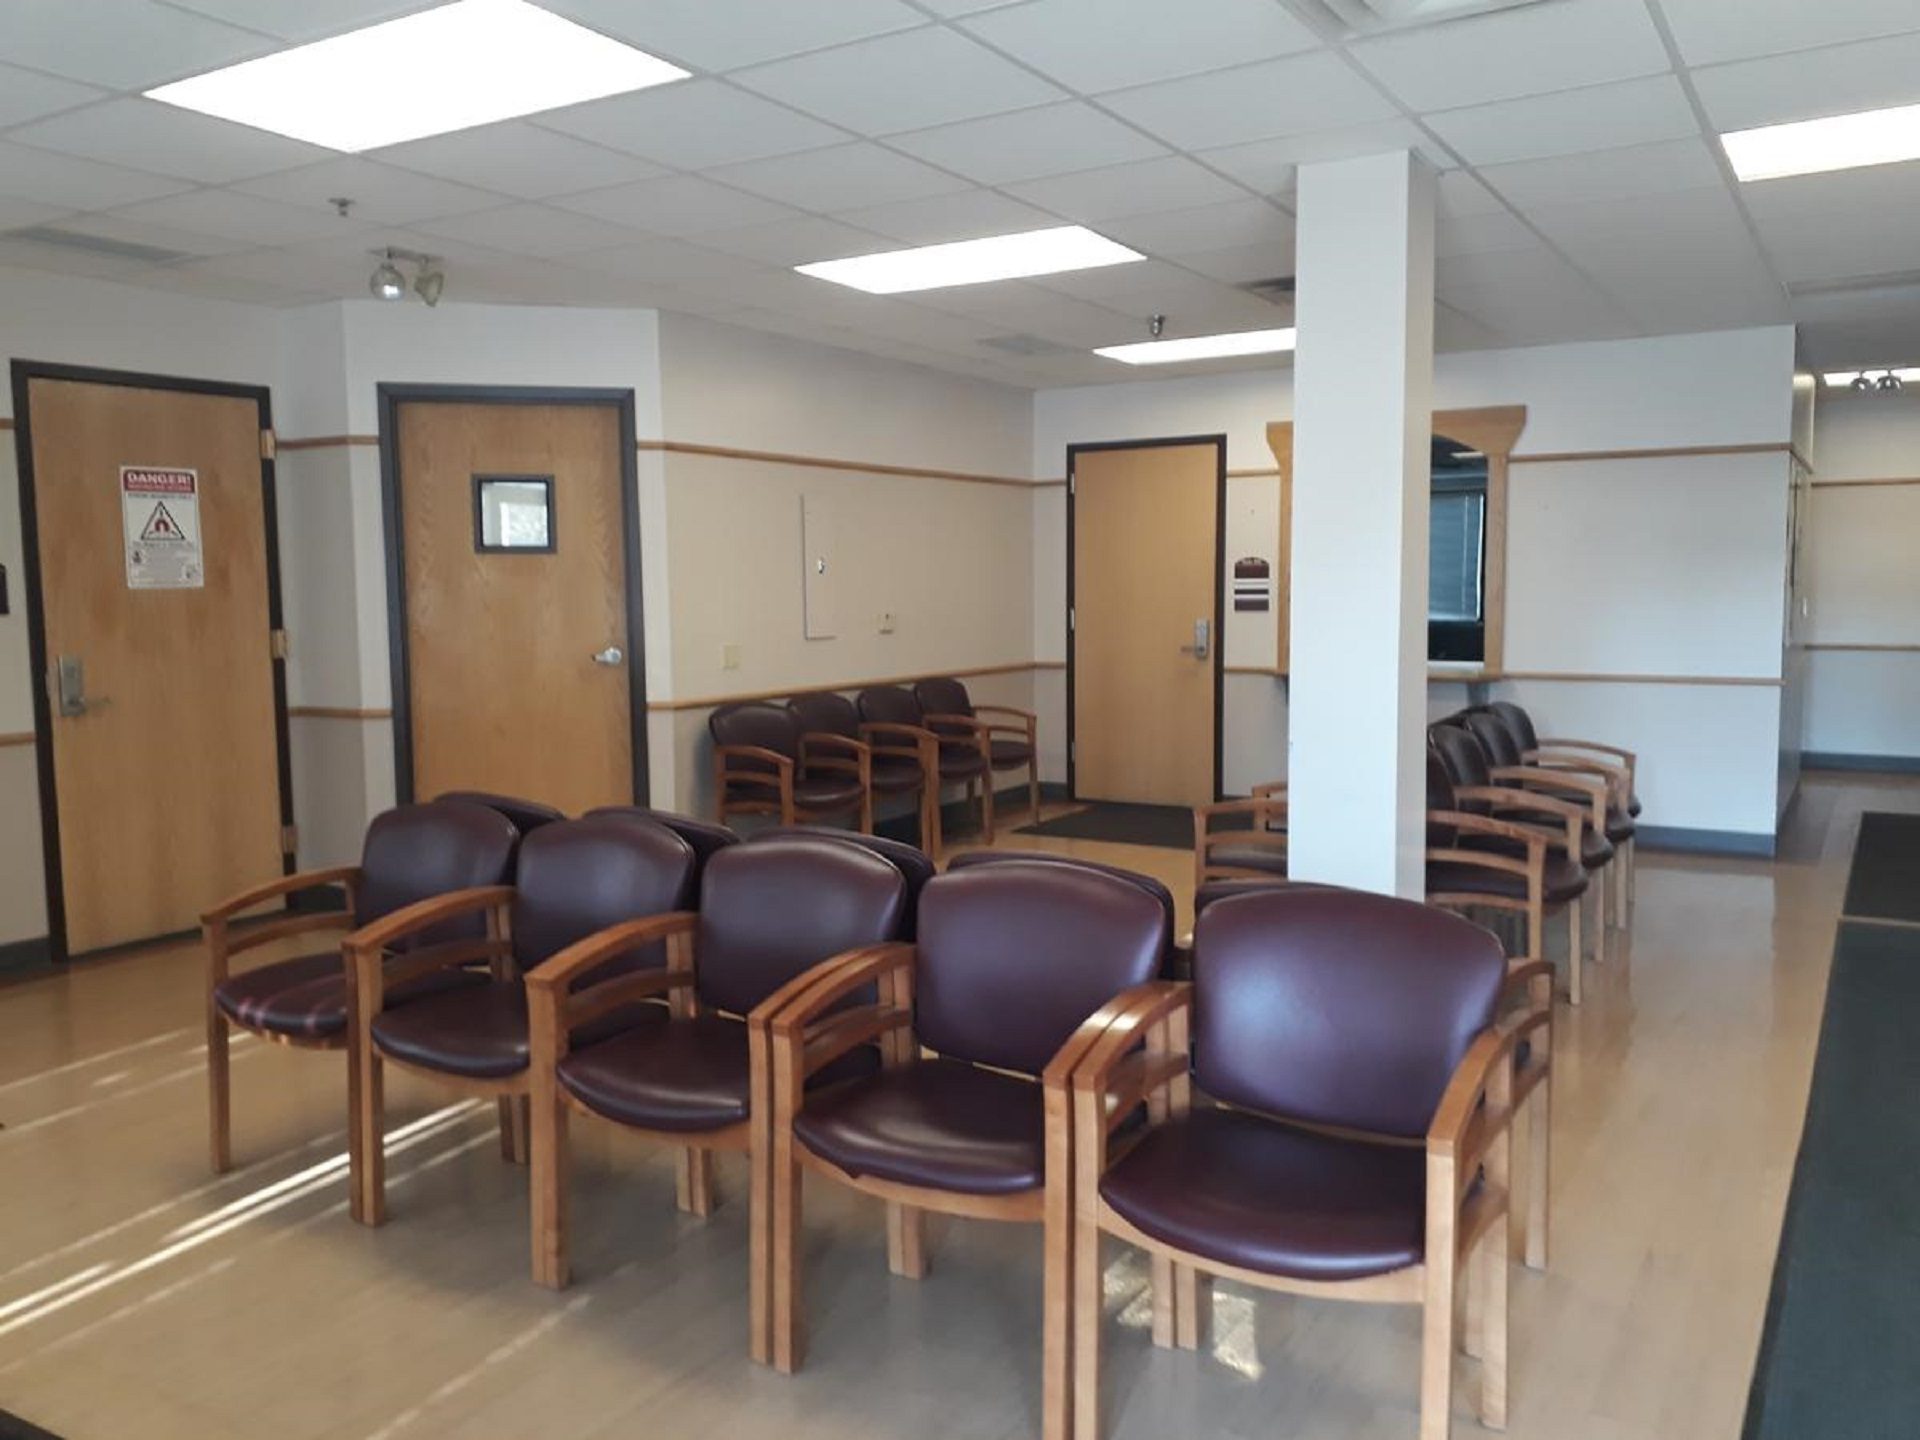 The waiting room of the diagnostic lab at Ellwood City Medical Center. To get to the office of Dr. Beth Magnifico, patients walk through this room and then take the elevator to the second level.